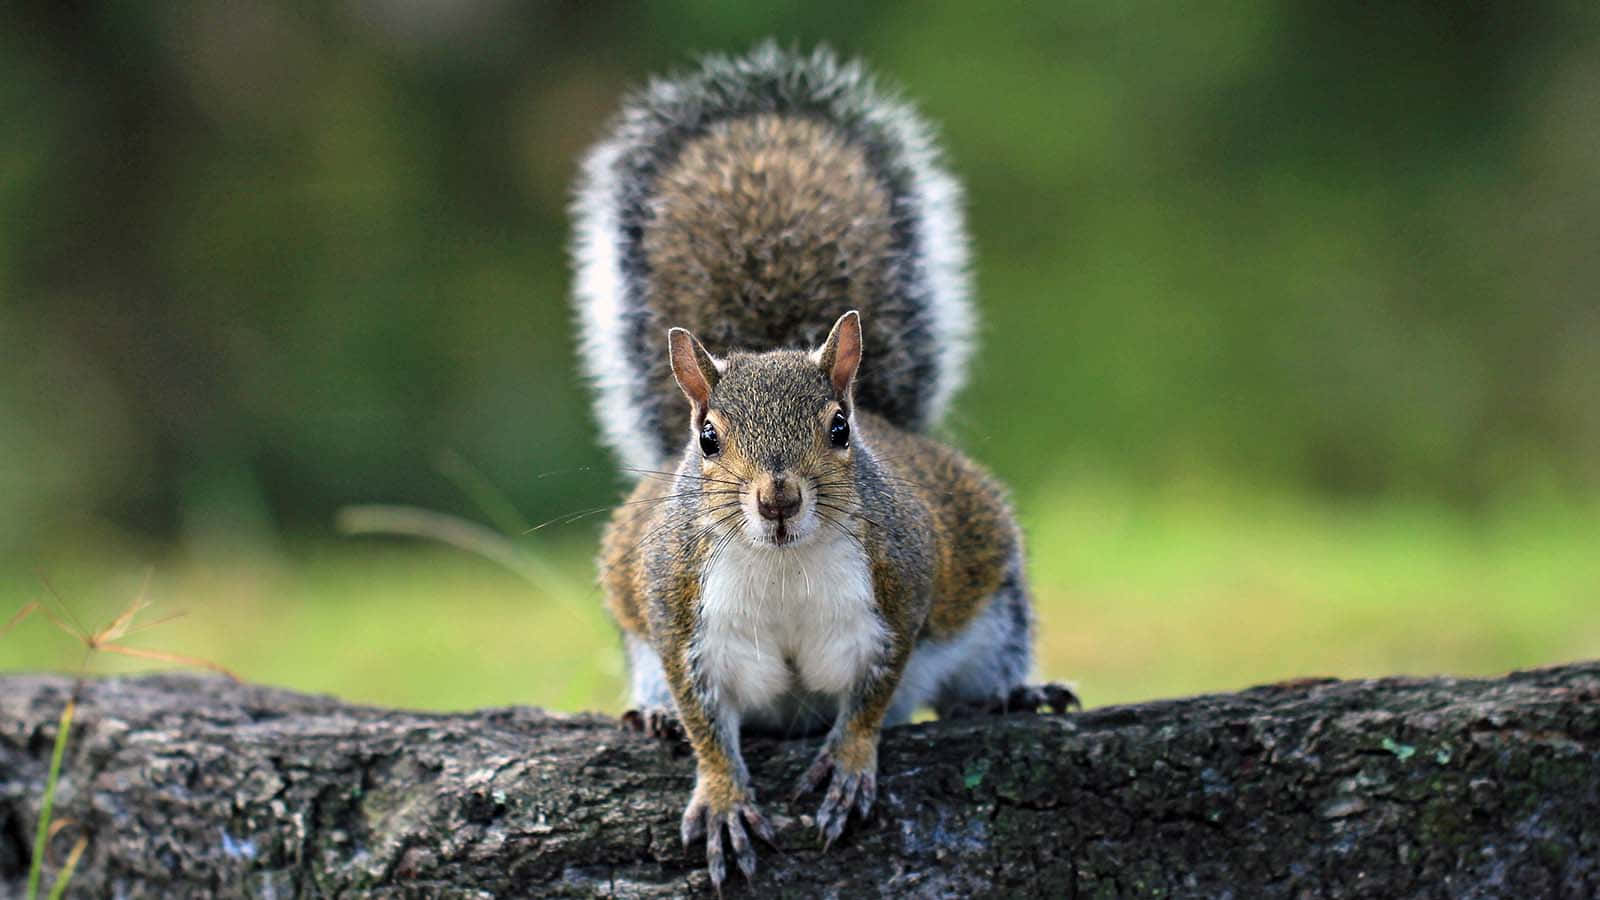 Image  Up Close With Nature - A Friendly Squirrel